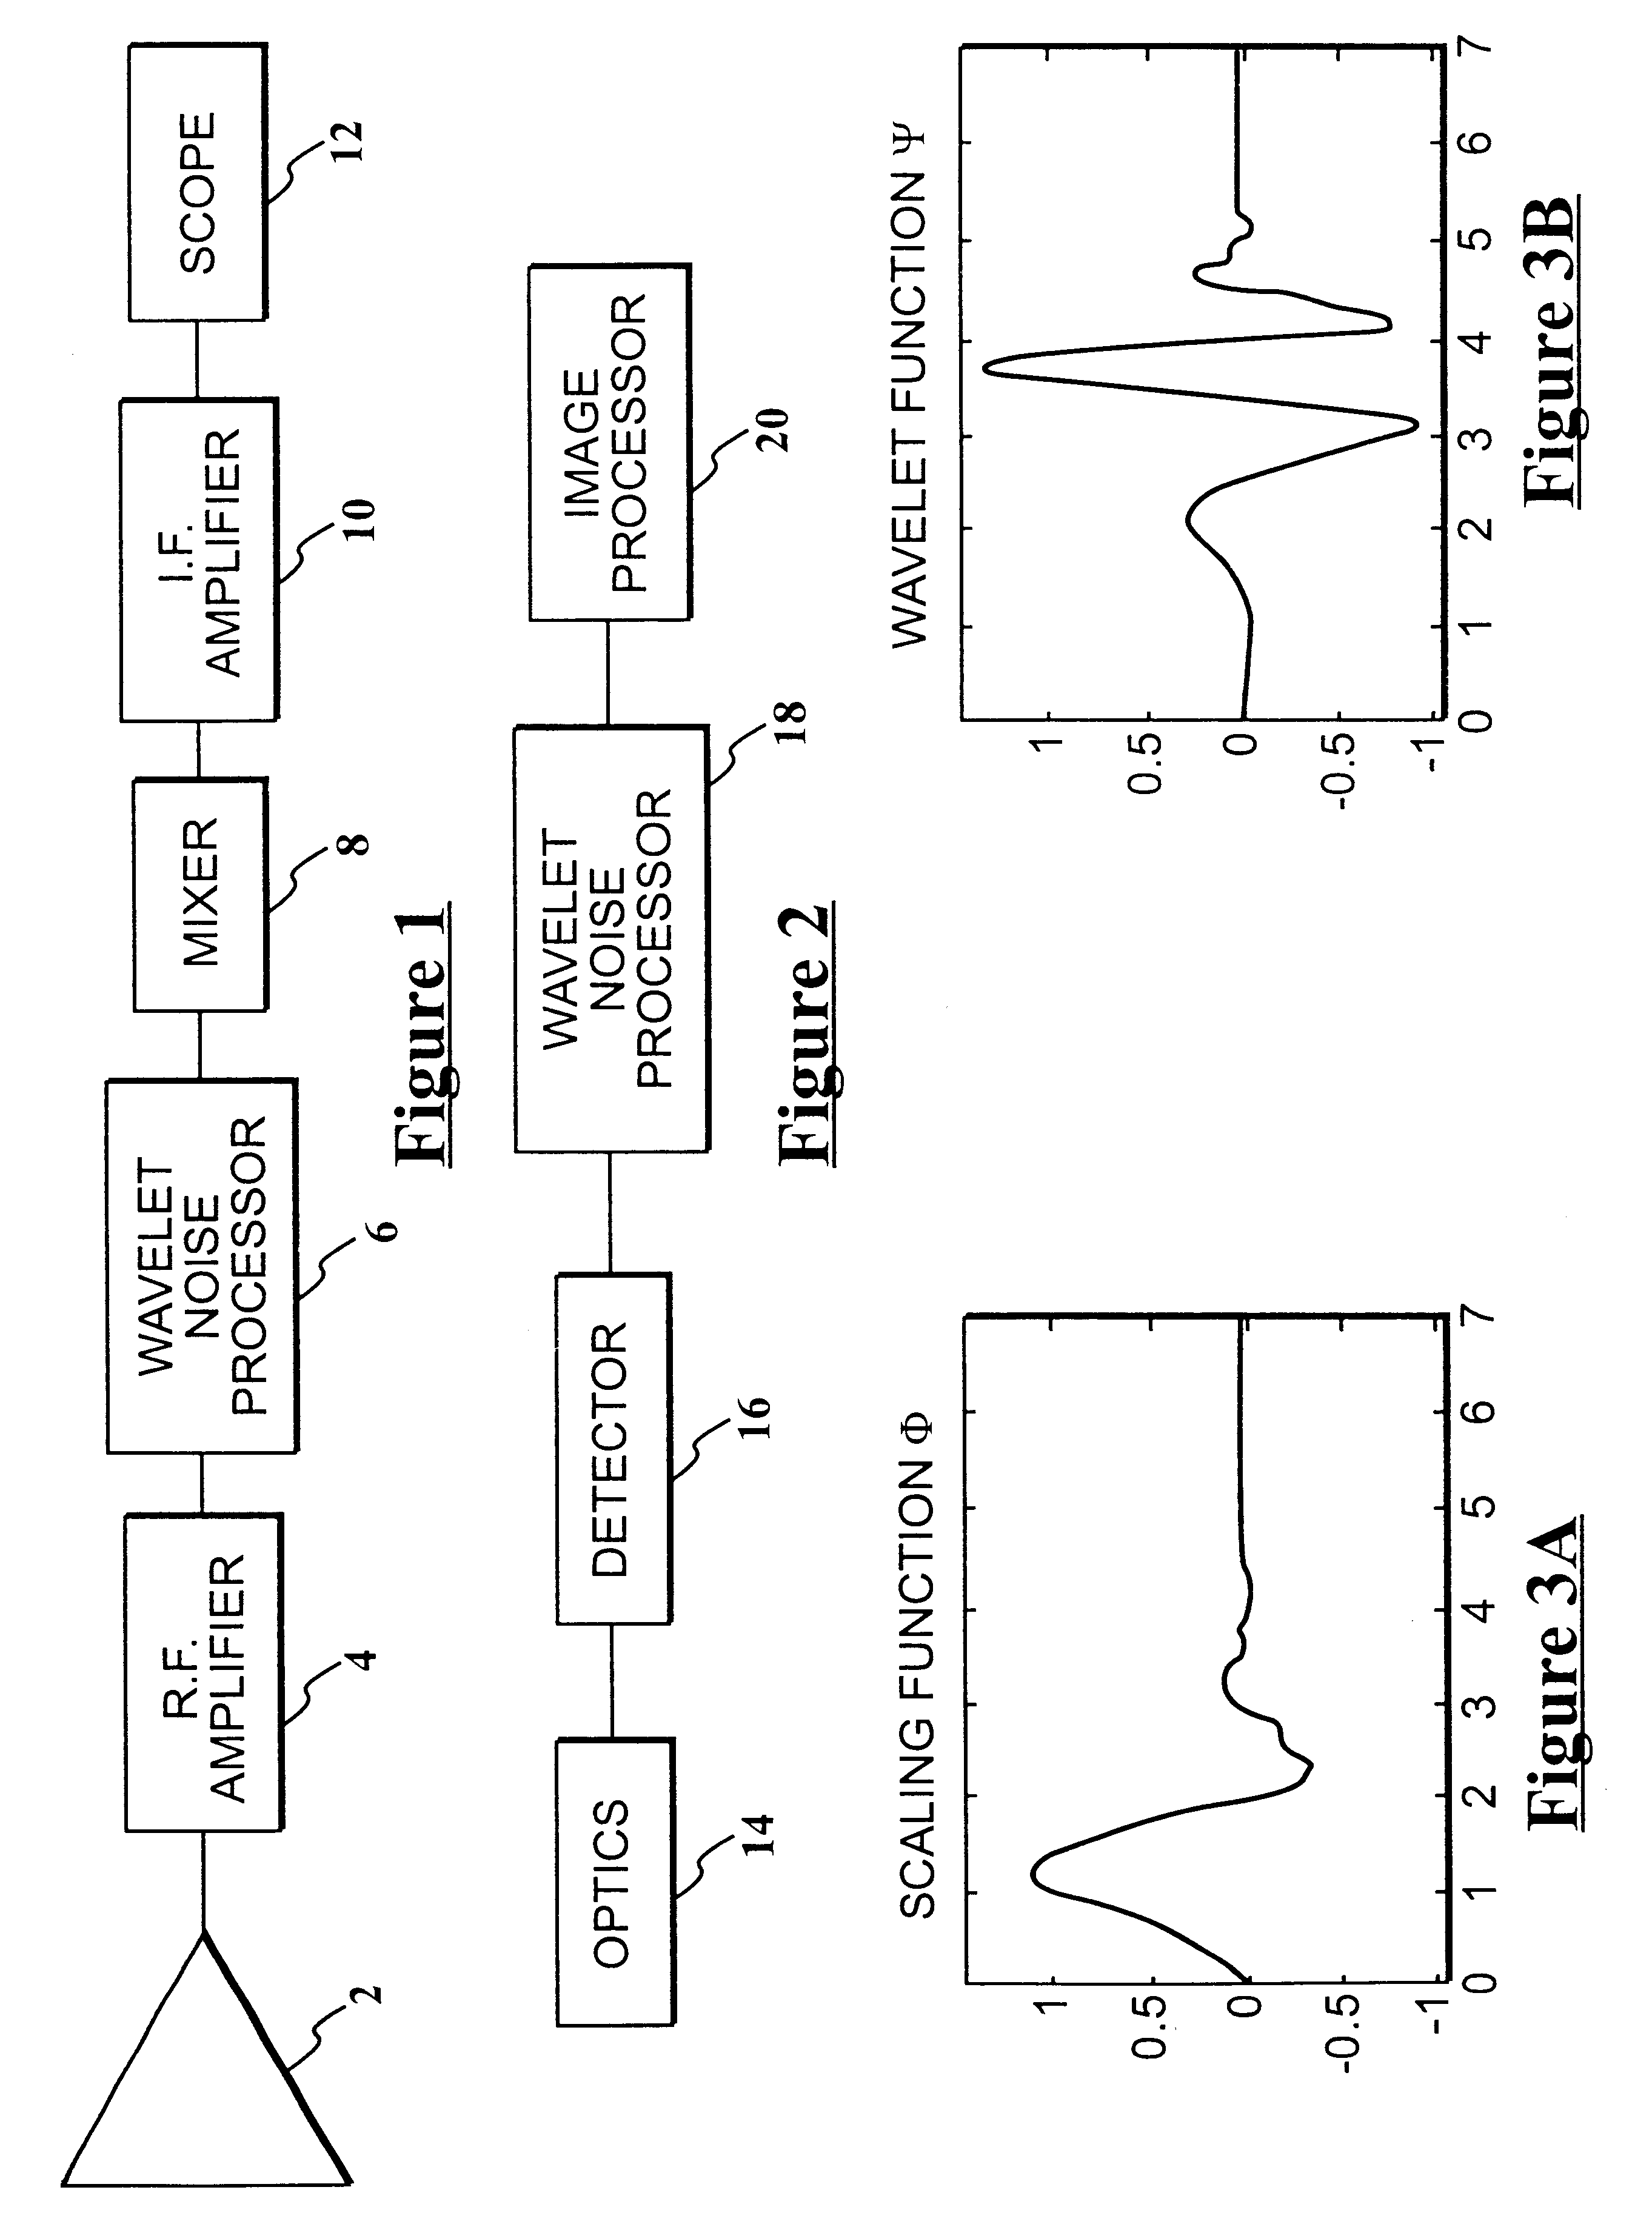 Method and apparatus for improving signal to noise ratio using wavelet decomposition and frequency thresholding